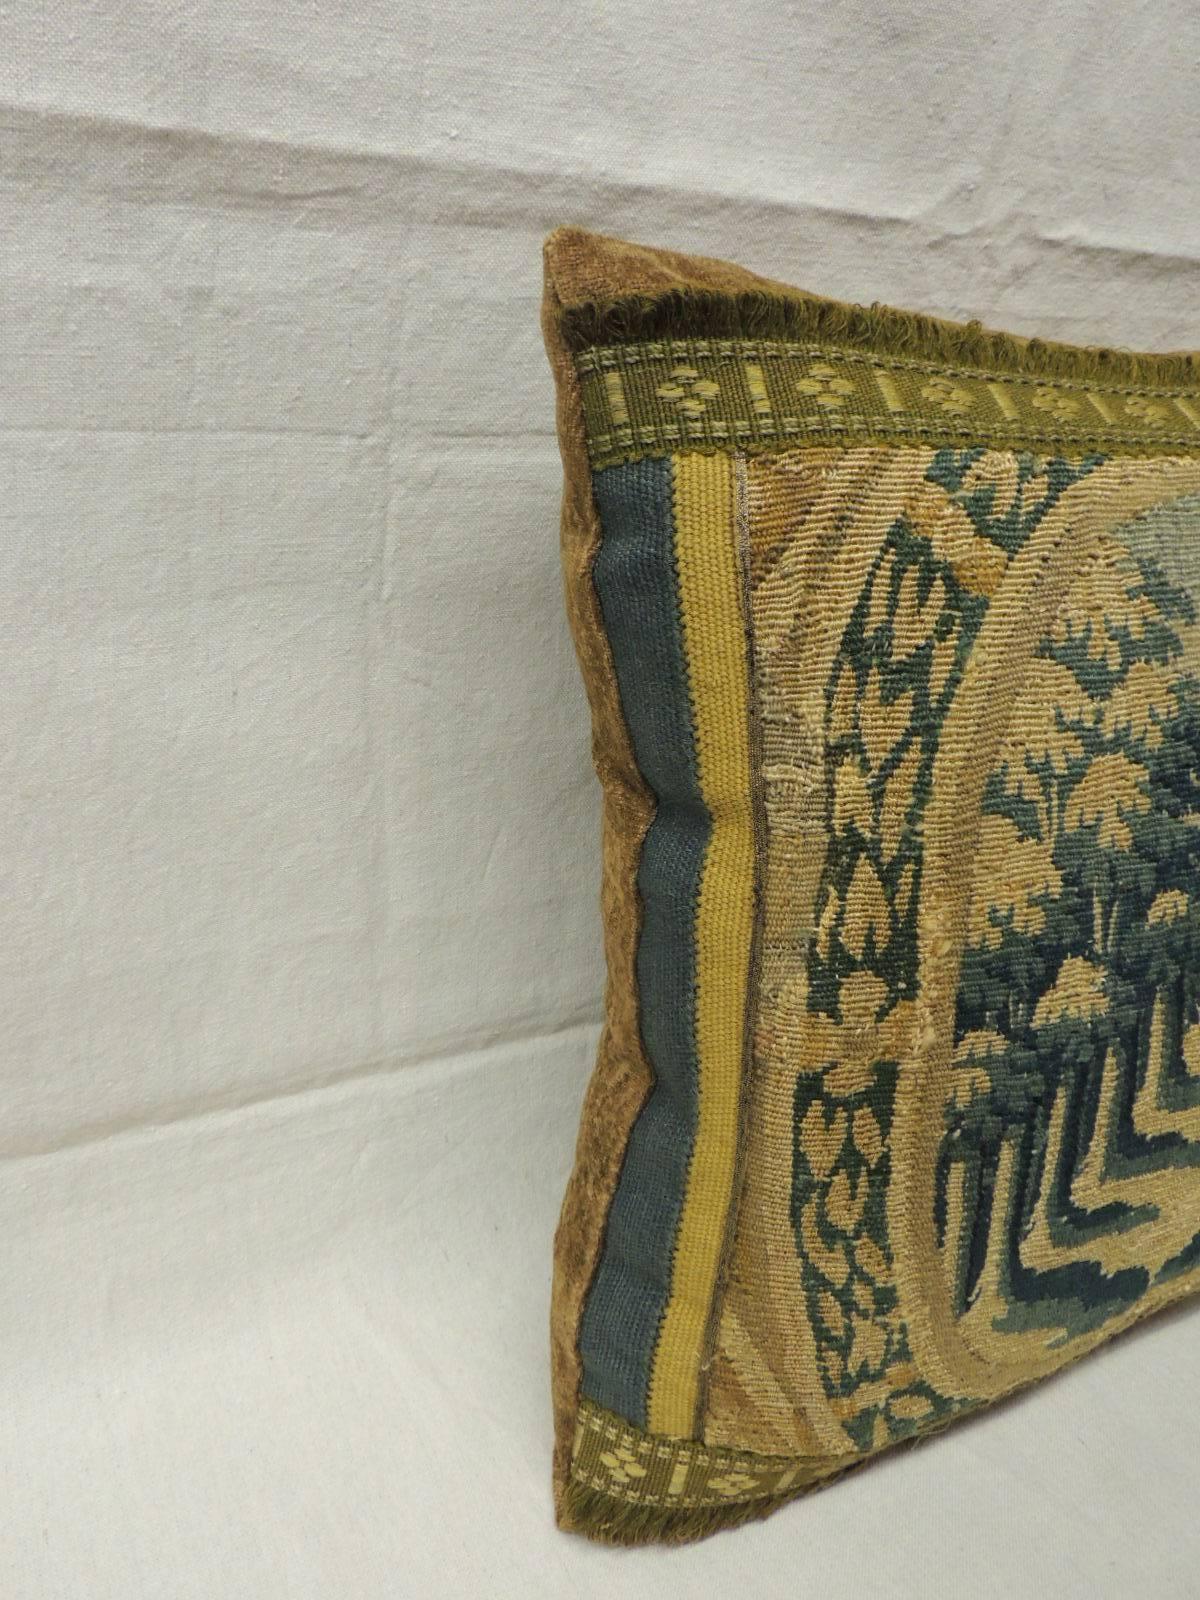 The antique tapestry depicts trees and the entry-way to a castle. In shades of: green, deep blue and gold. Tapestry is framed with an antique trim with golden chenille in the frame and backing.  Pillow hand-made and designed in the USA.  Closure by